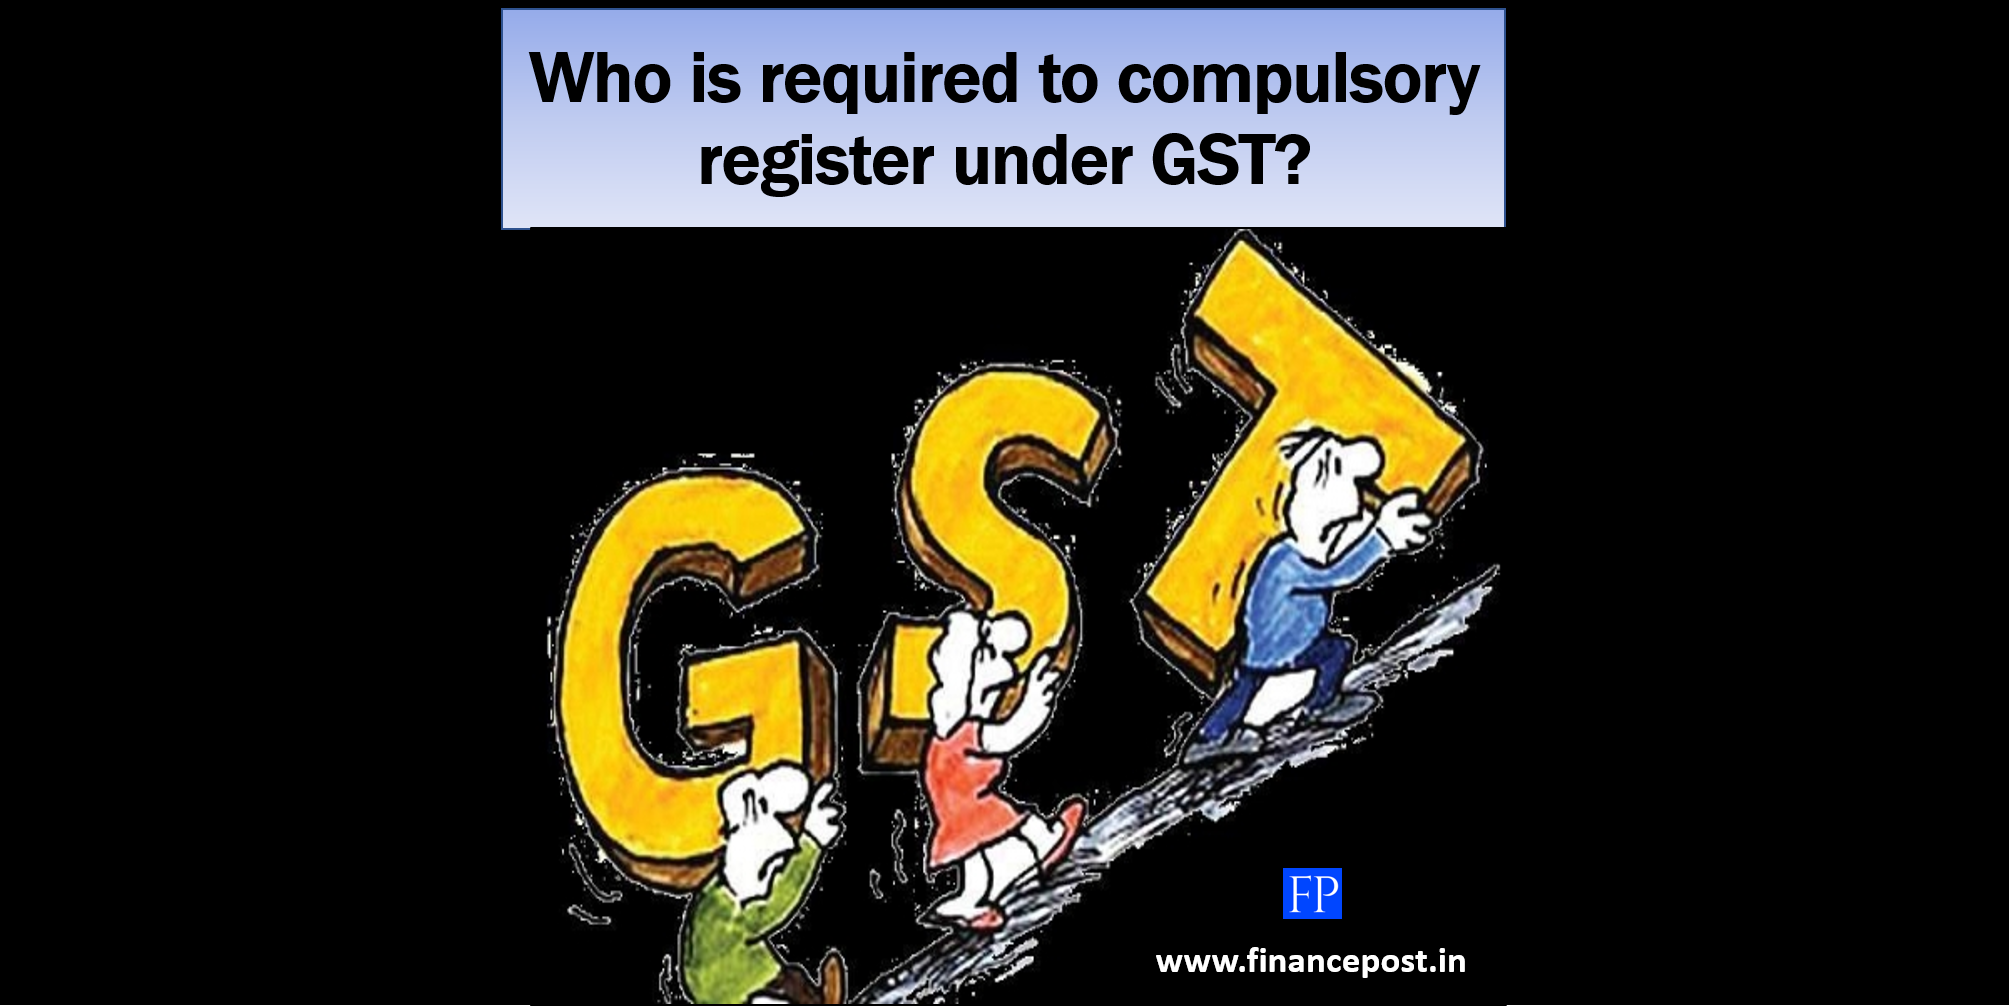 Who is required to compulsory register under GST regime?